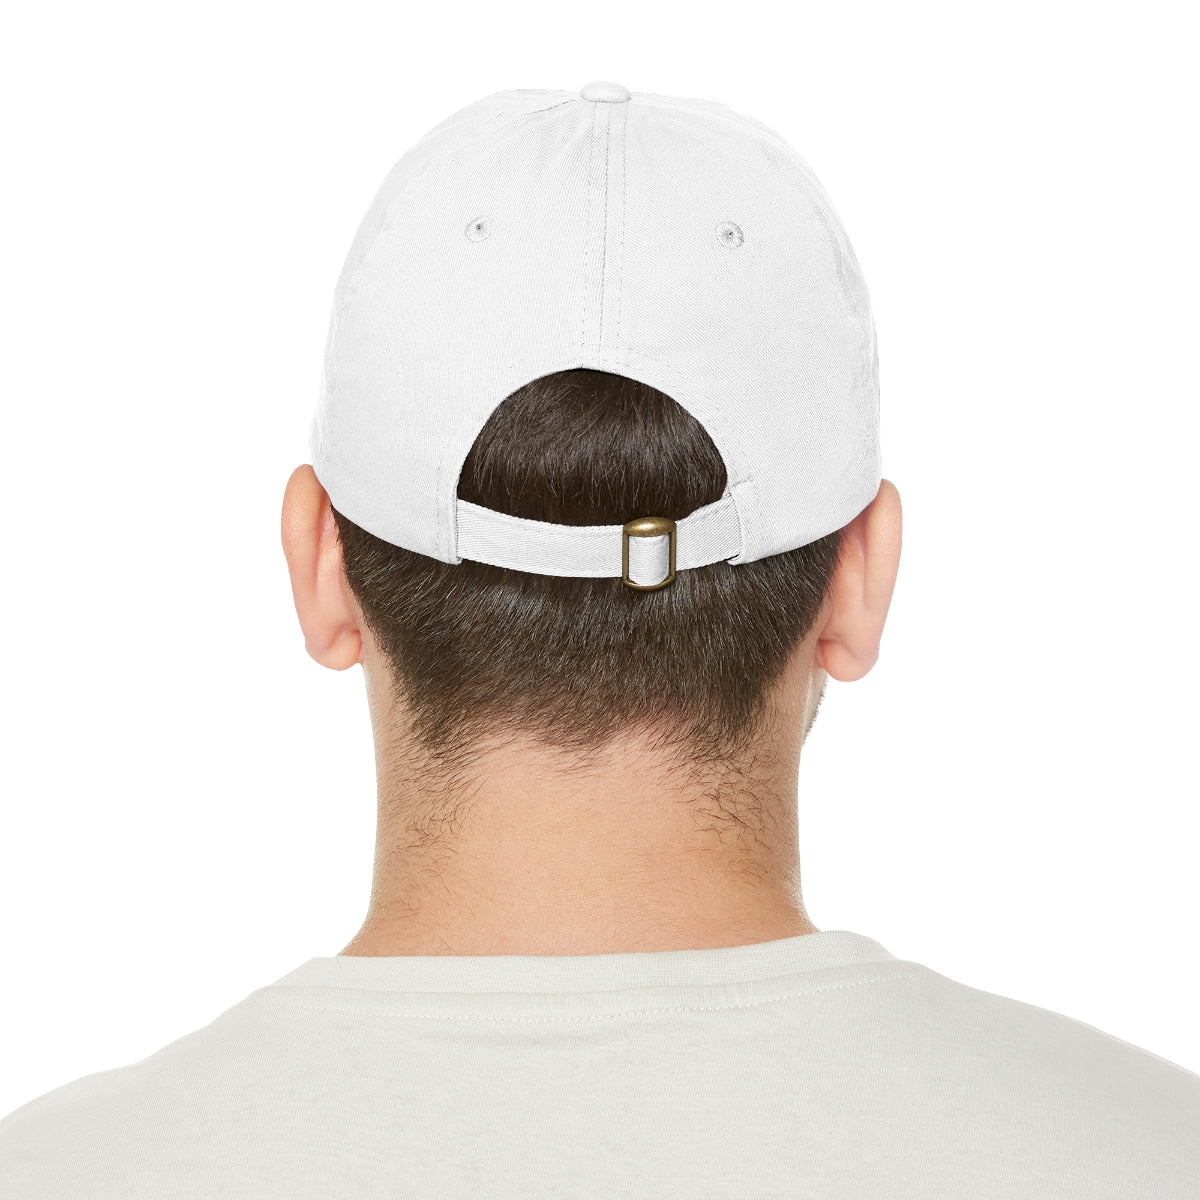 Magnet on my mind Dad Hat with Leather Patch